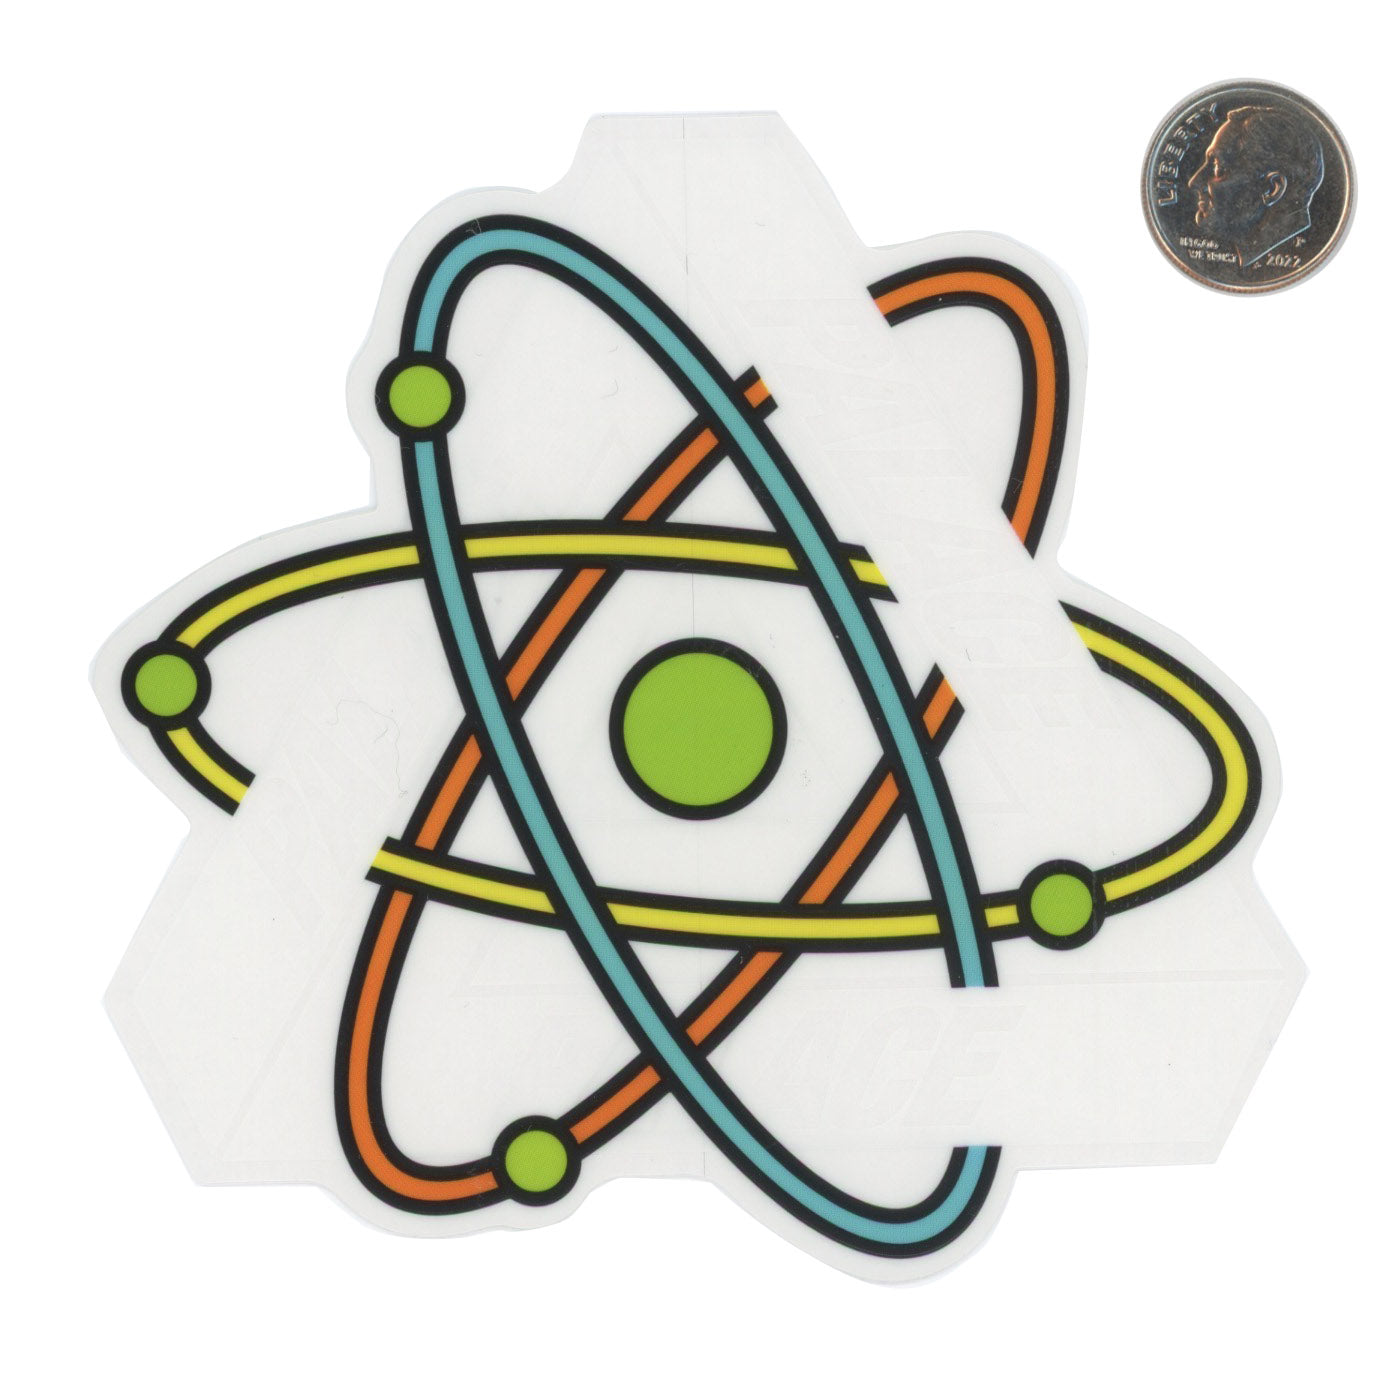 The Palace Molecule Structure Sticker with dime